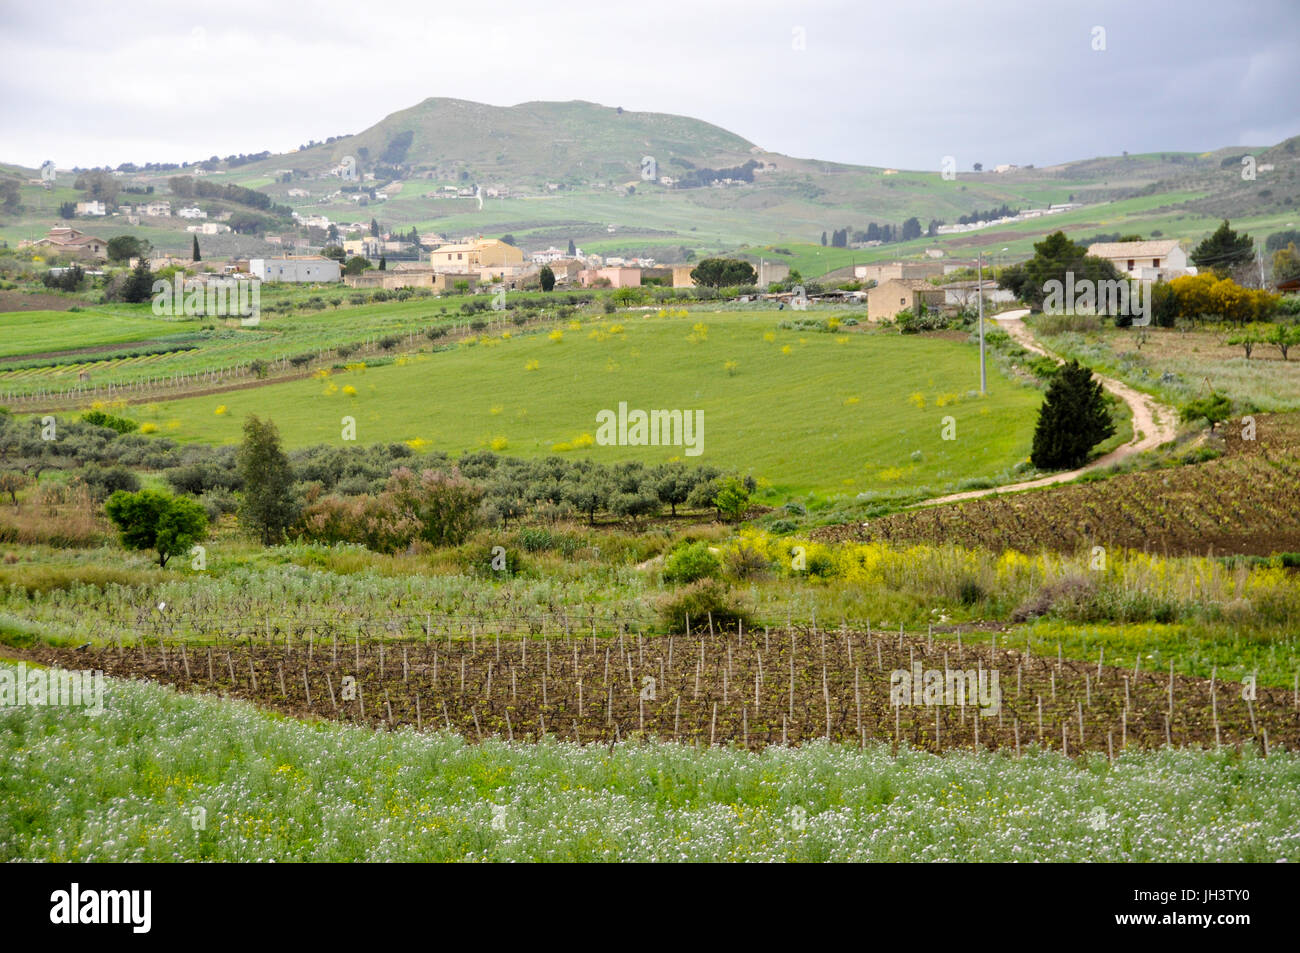 Fields of vineyards and green pasture in rural Sicily, Italy. Stock Photo